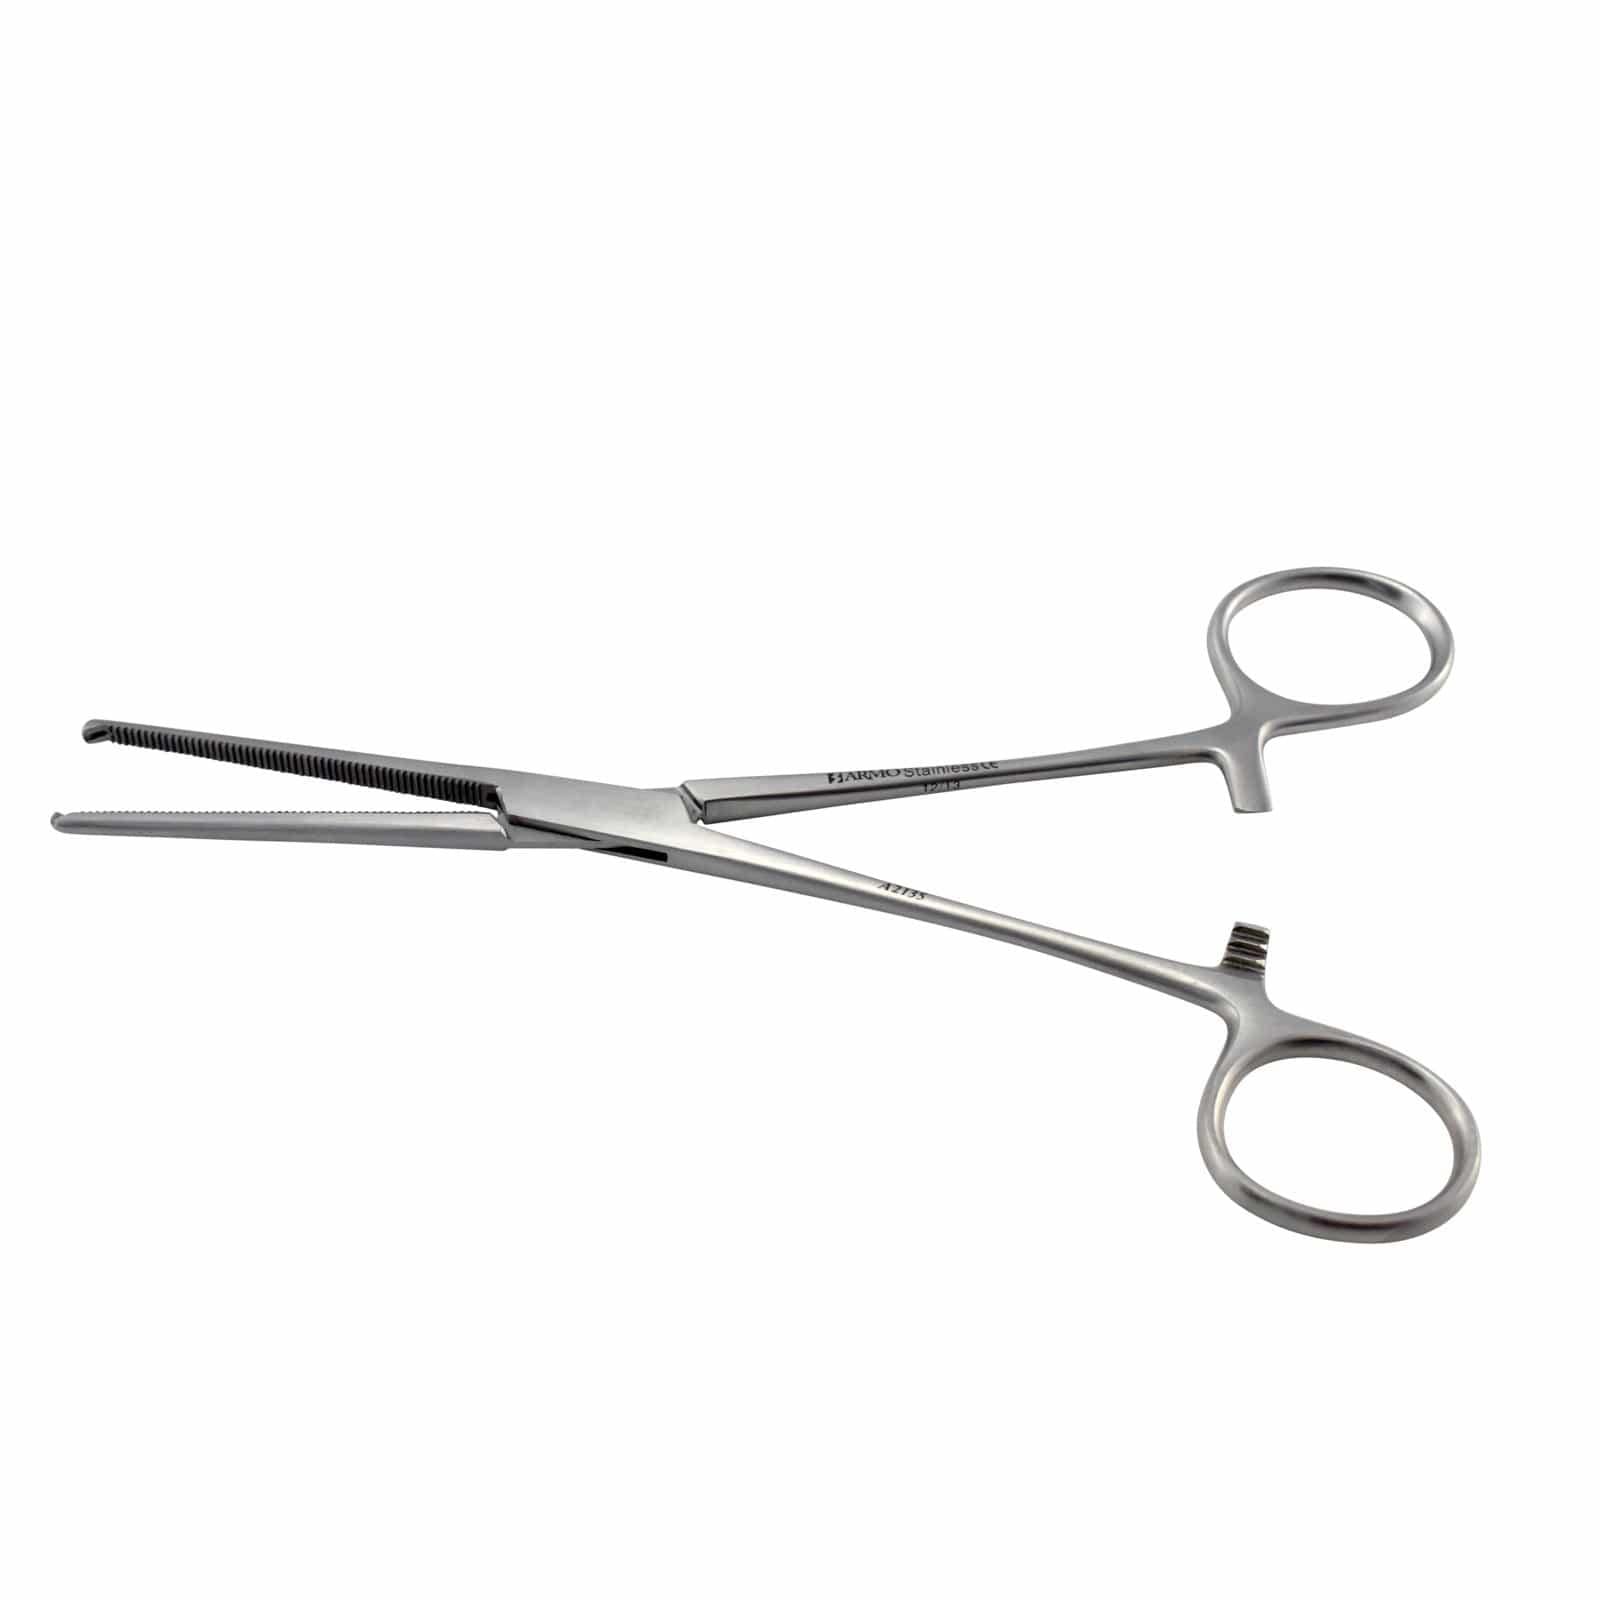 Armo Surgical Instruments 18cm / Straight Armo ROCHESTER-OCHSNER Artery Forcep